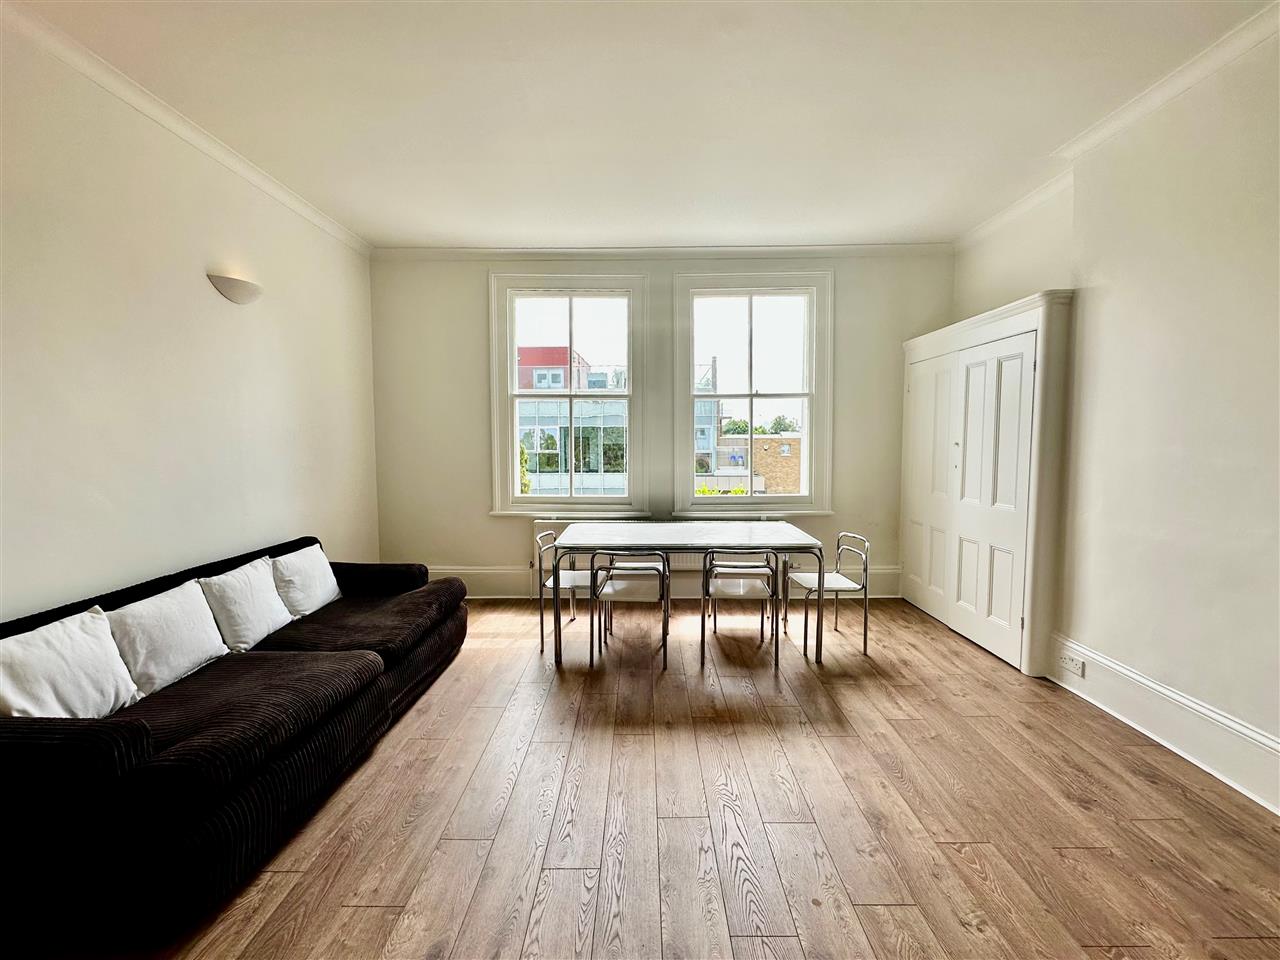 AVAILABLE 1st JULY 2023. An exceptionally large first floor converted flat within an imposing period house with own section of a westerly facing rear garden. The accommodation comprises of two extra large double bedrooms, large reception room, equipped kitchen and shower room. The flat has been ...